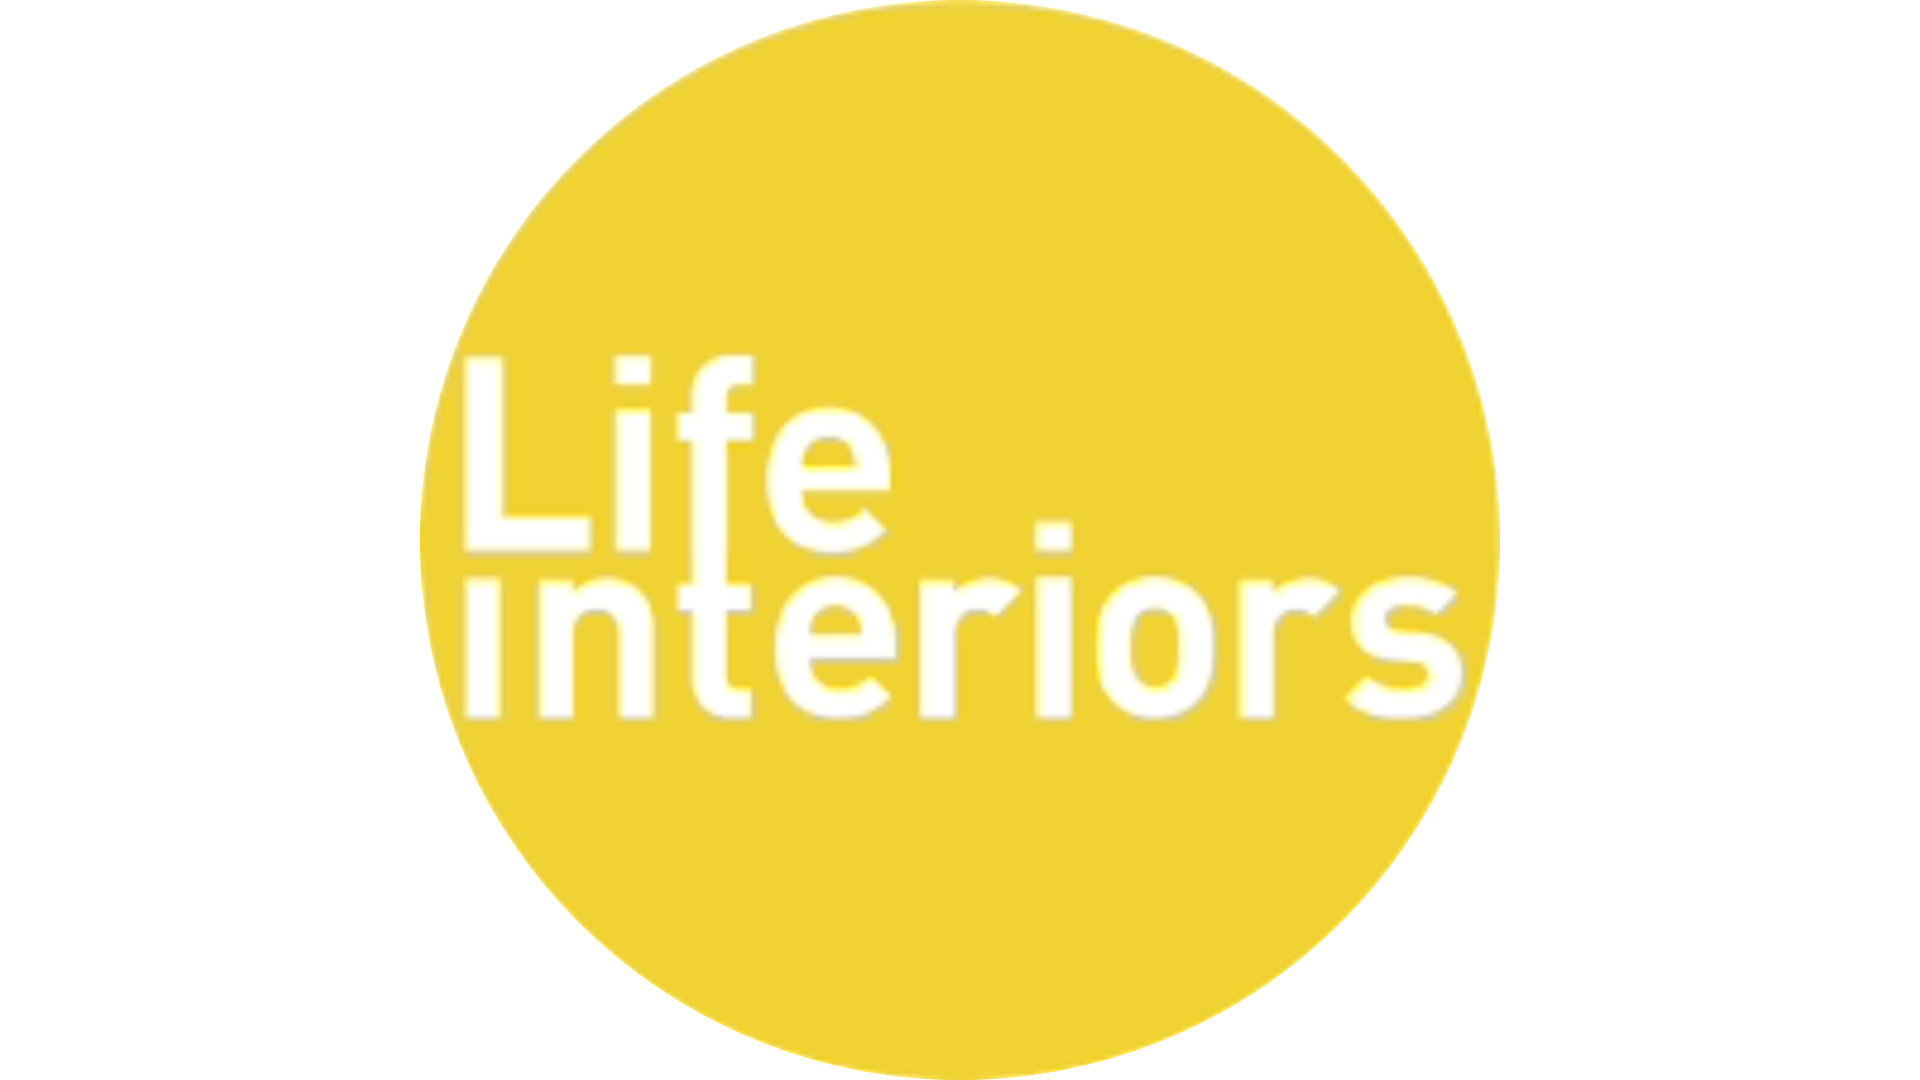 Get the Laid Back Luxe style by shopping with Life Interiors